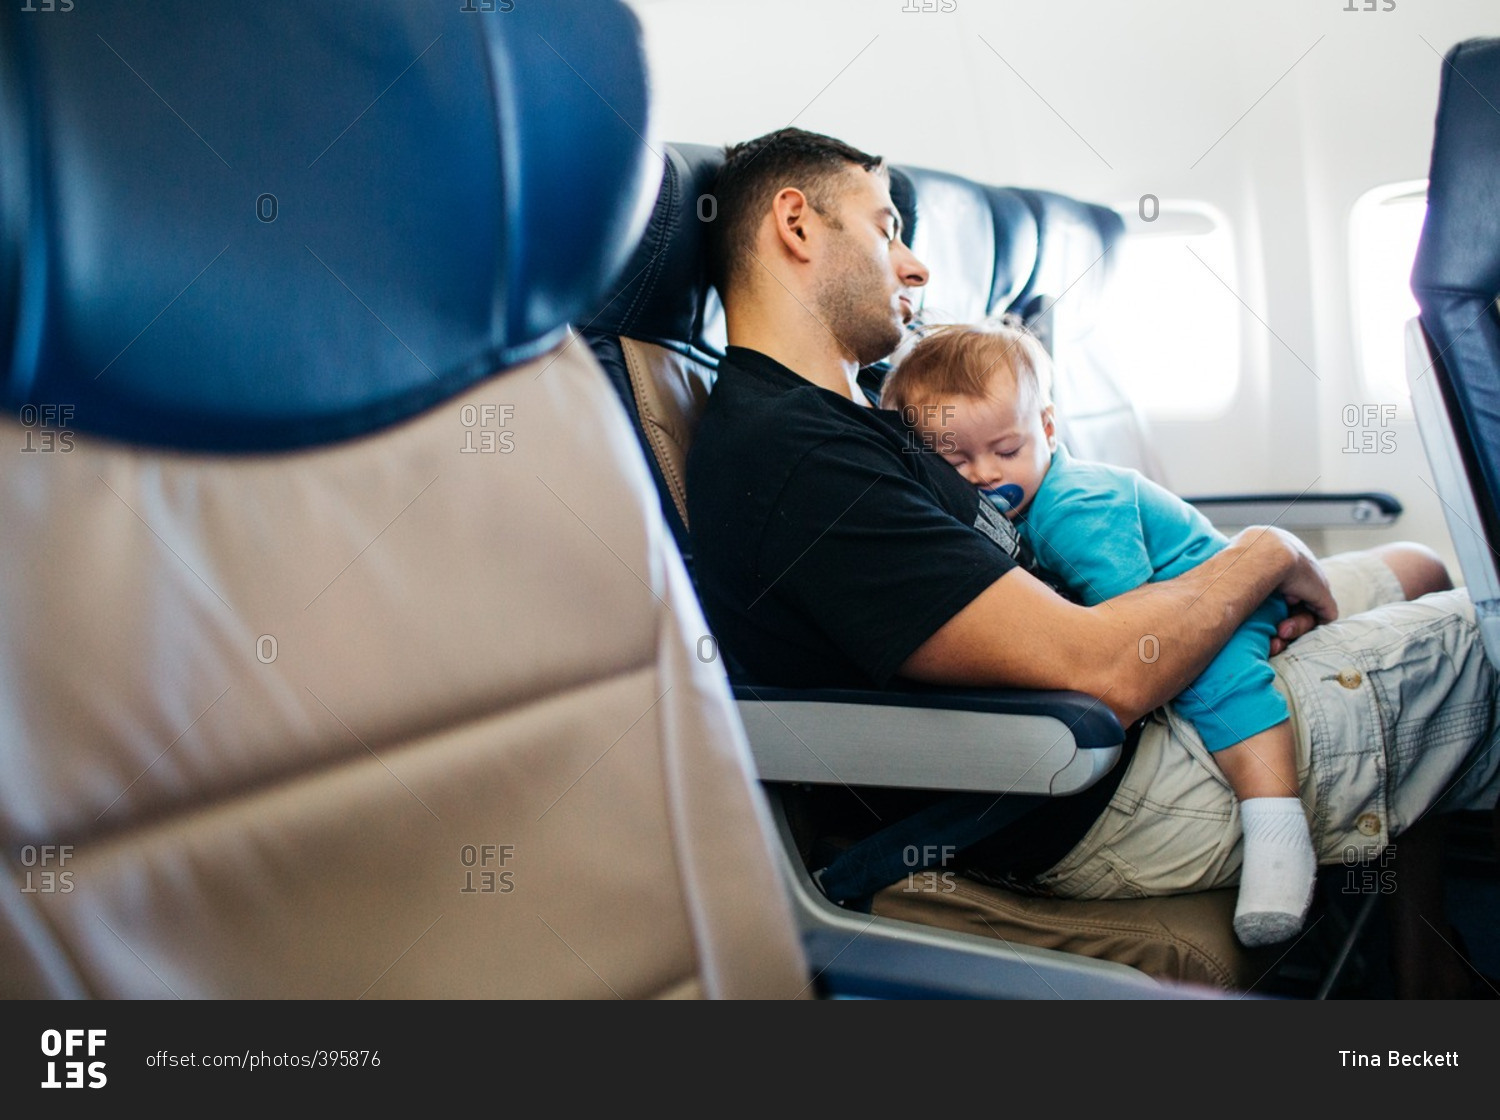 Dad and baby sleeping on plane